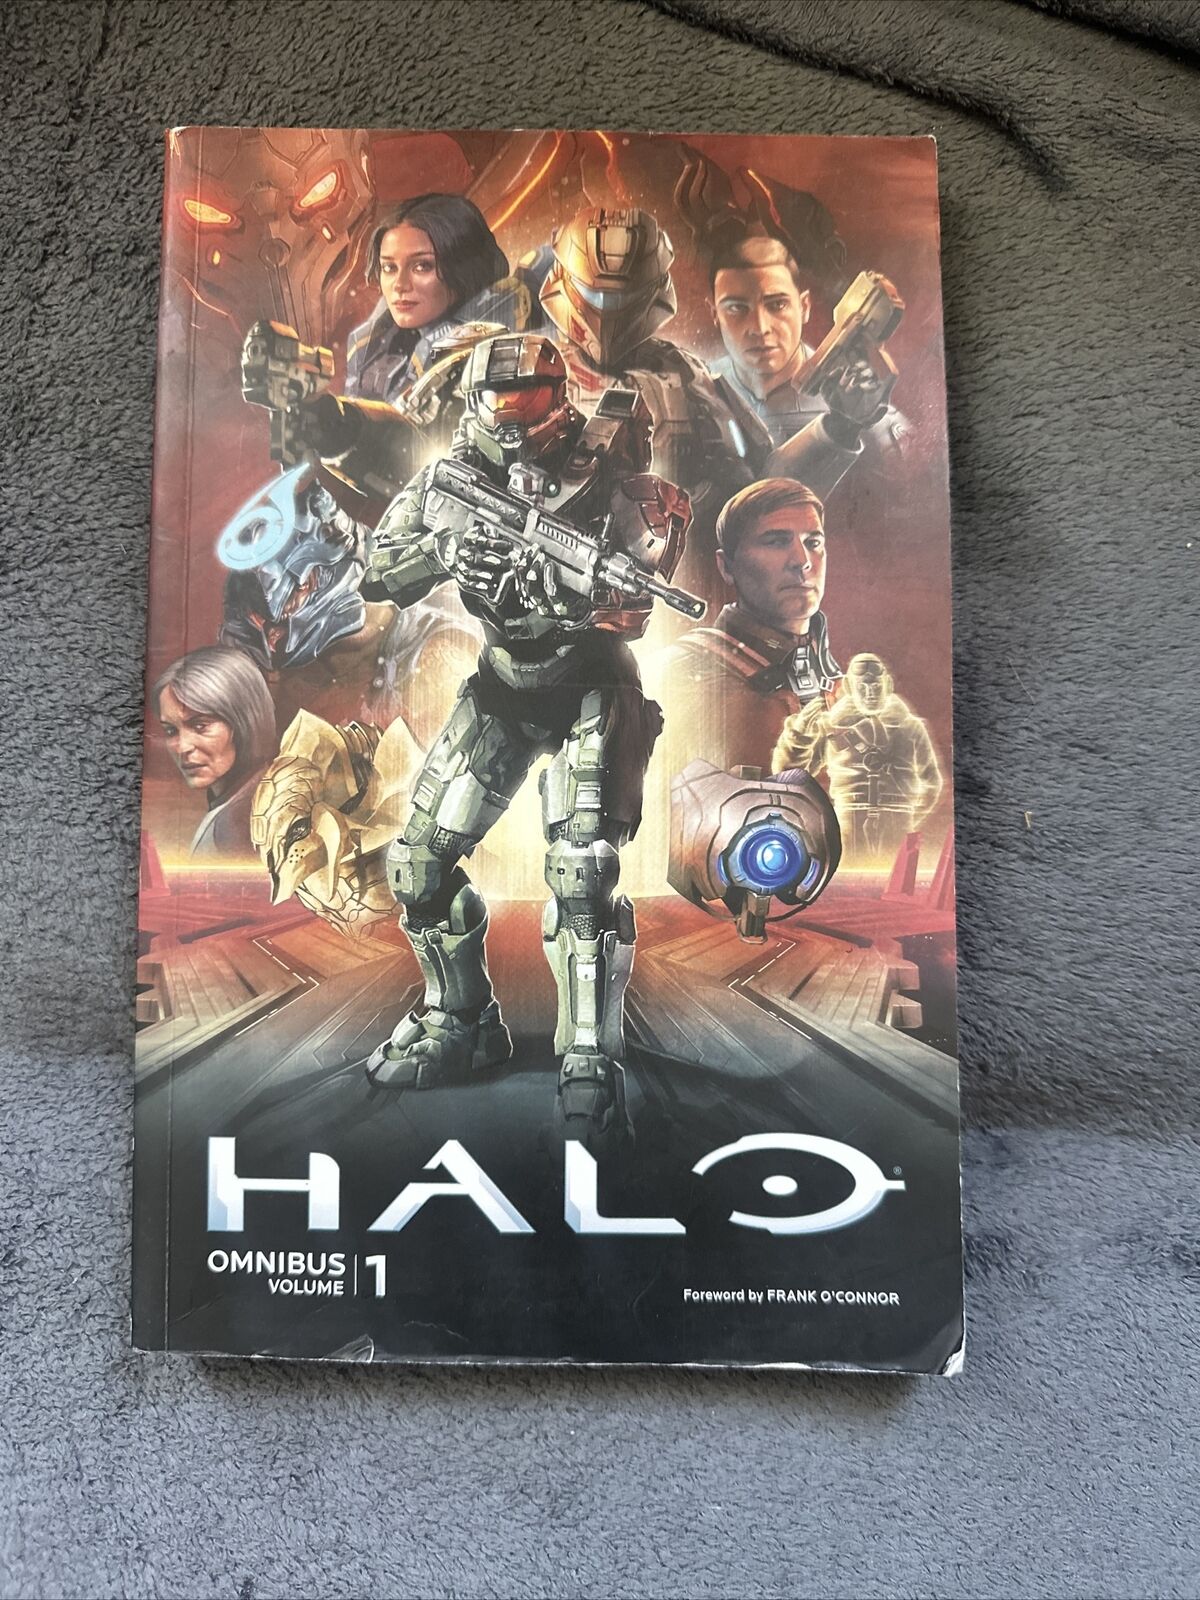 HALO OMNIBUS VOLUME 1 By Brian Reed & Chris Schlerf Rare Collectible Softcover